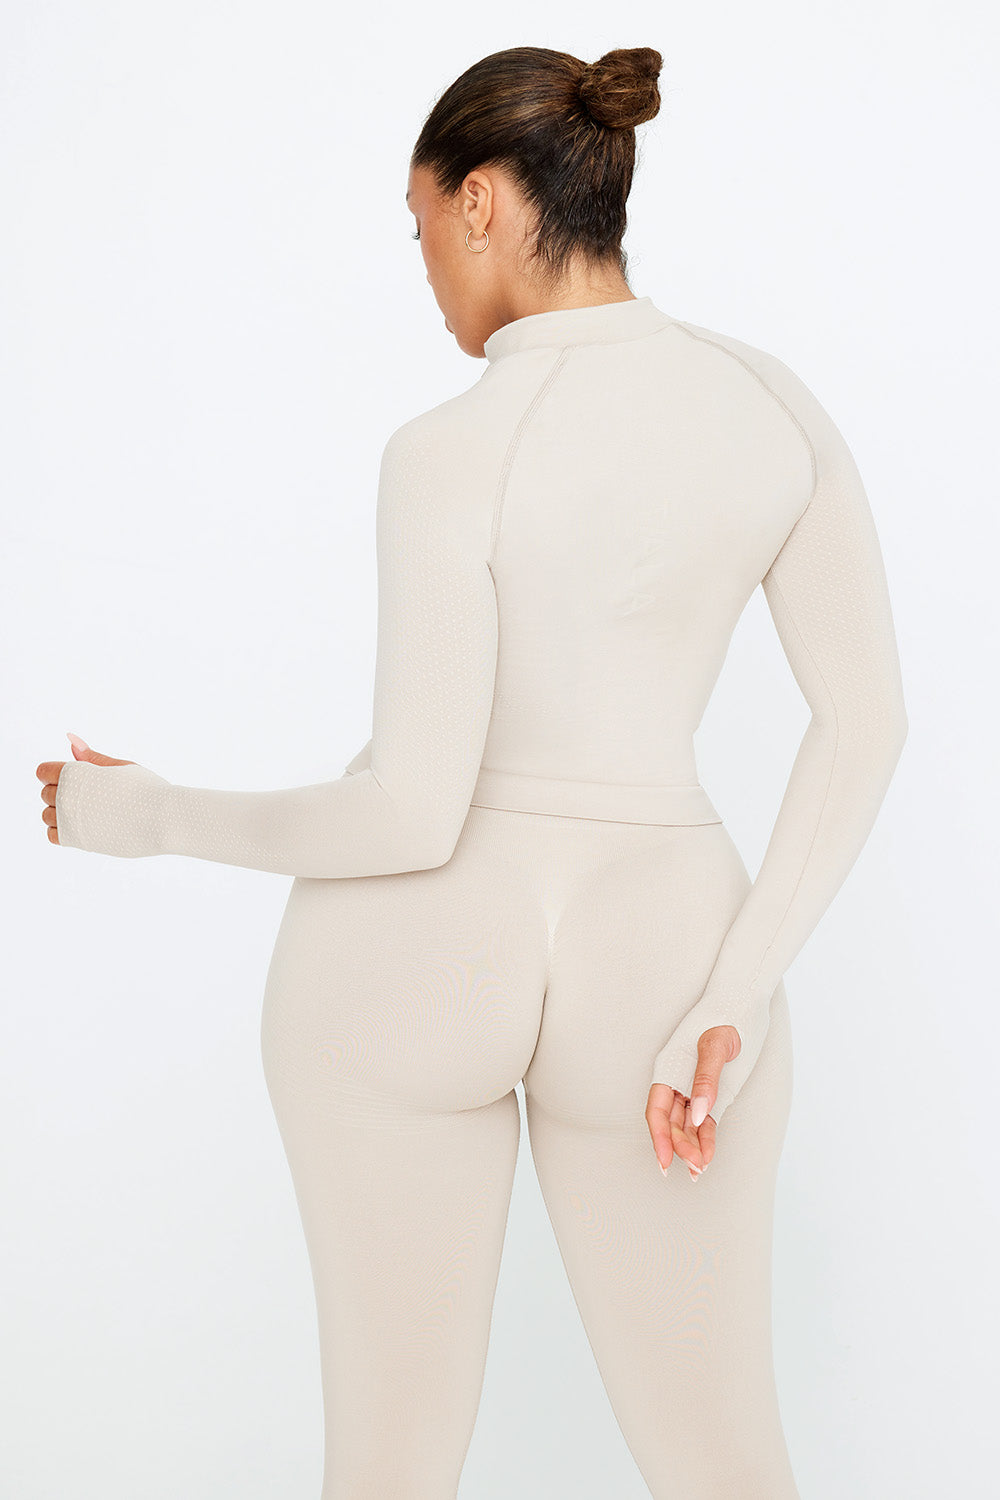 Snatched and flattering': The SKIMS smoothing short that creates a smooth  canvas is back in stock